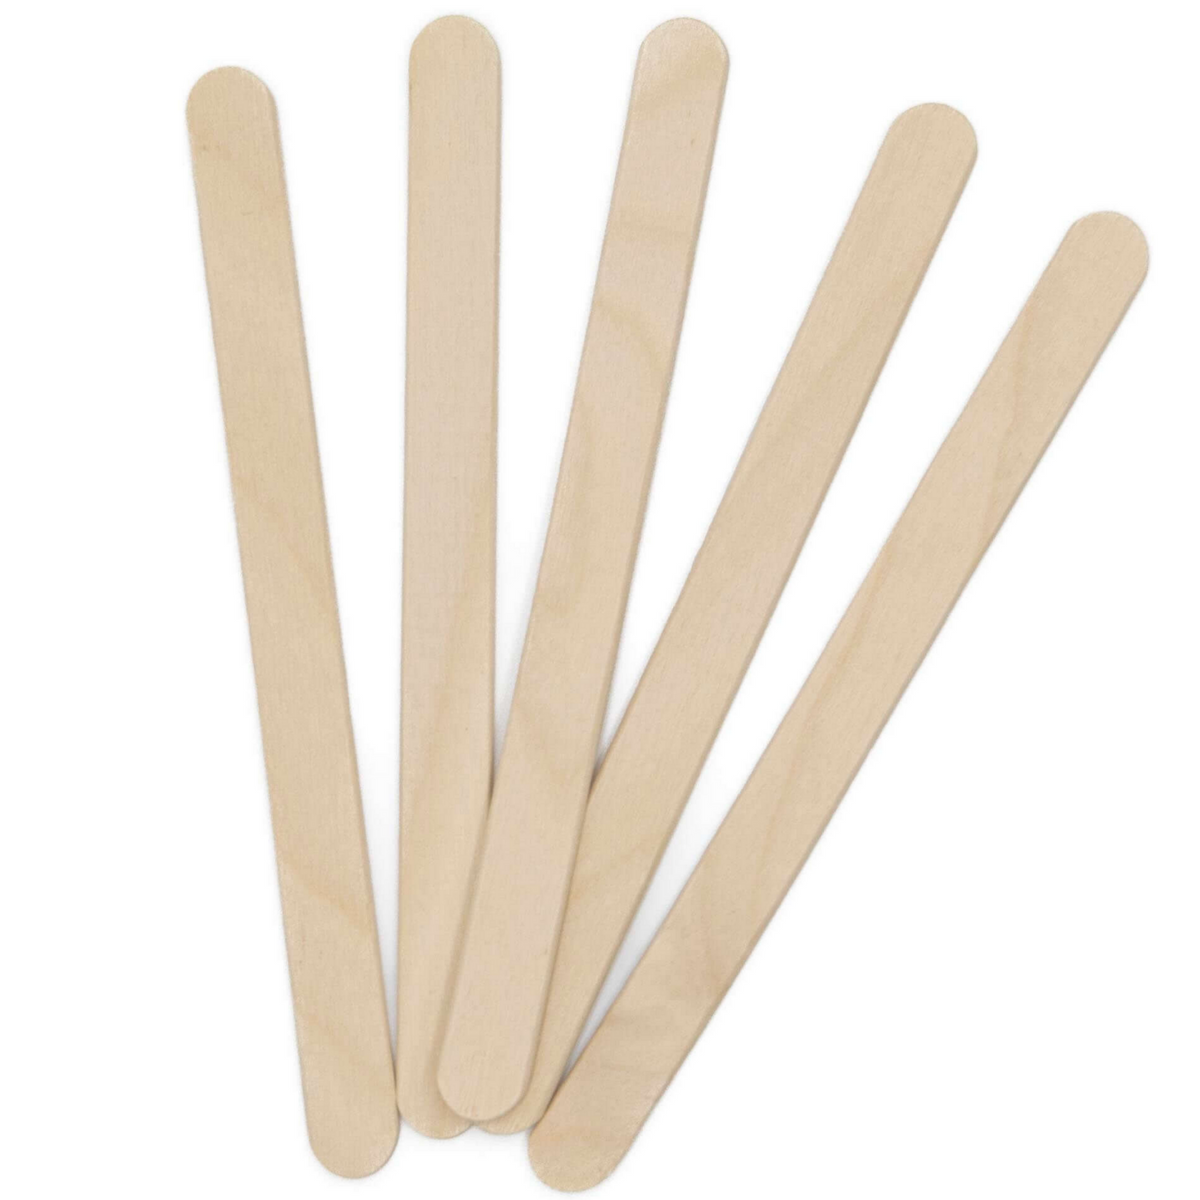 Wax Applicator Sticks 3/8 X 4 1/2. Pack Of 100 Small Wooden Waxing  Spatulas For Home Use